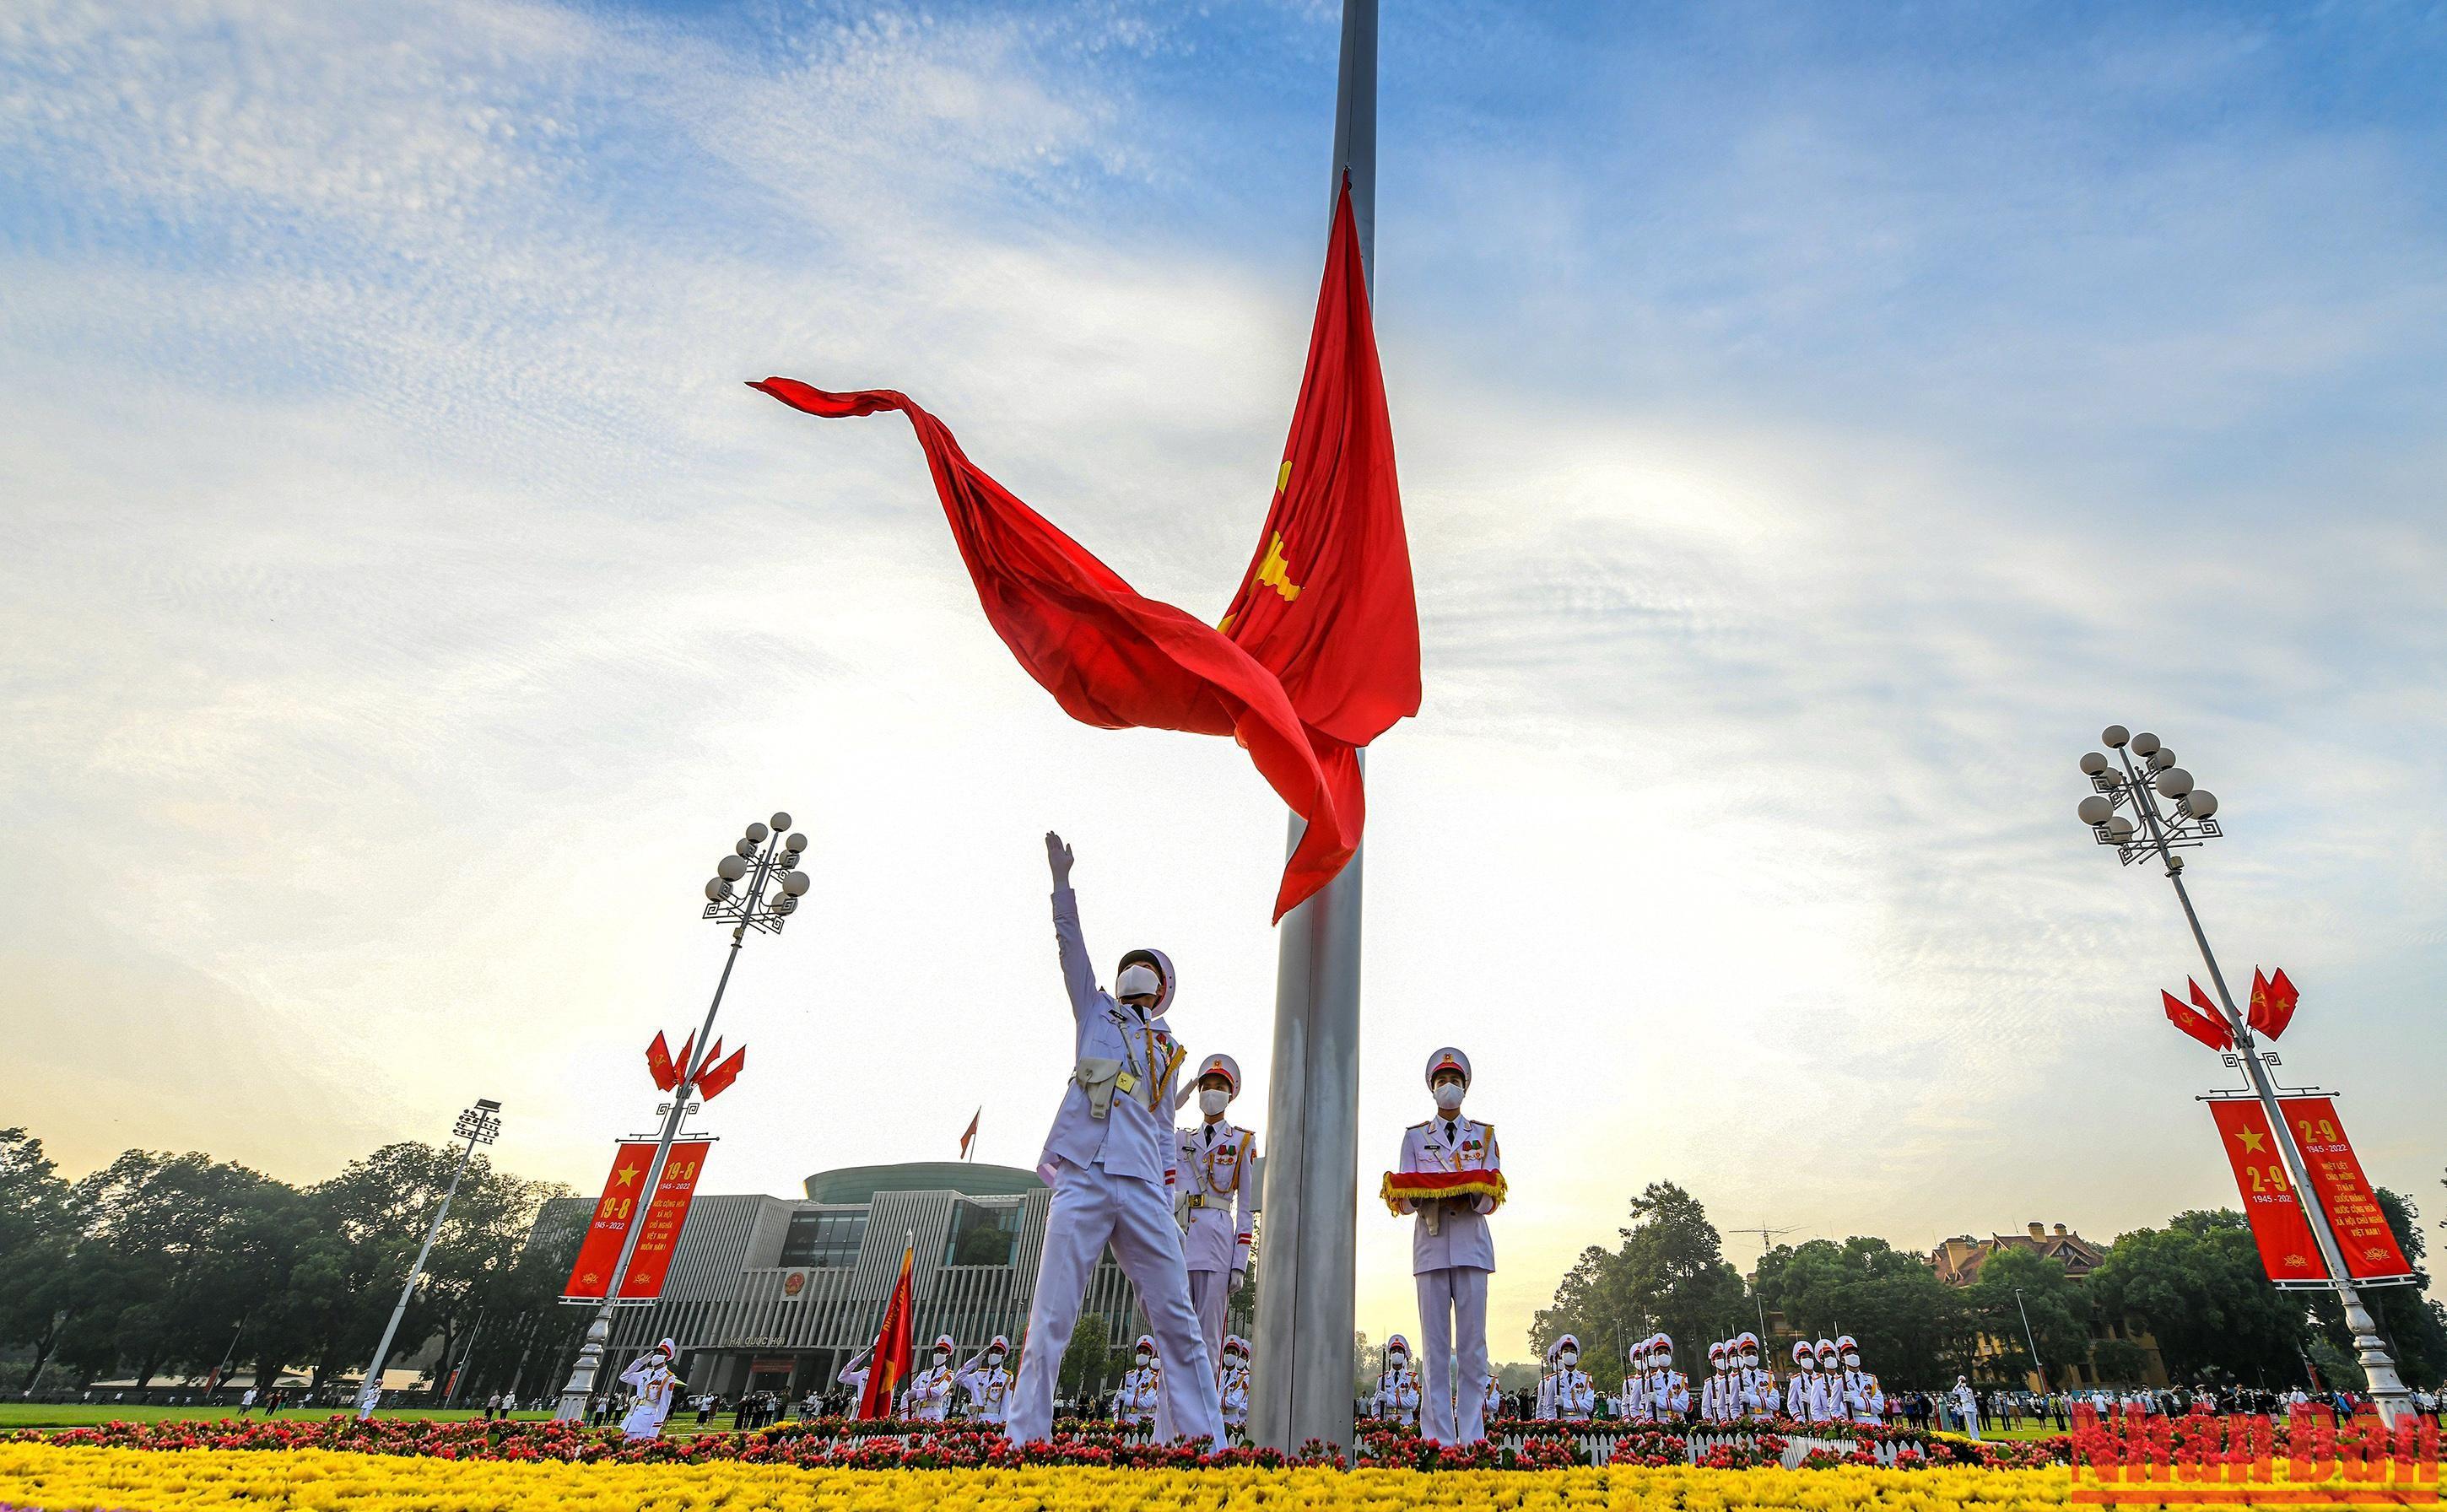 At about 5:50am, when the honour guards prepare to carry out the ceremony, the door of President Ho Chi Minh's Mausoleum opens to reveal the famous quote “Nothing is more precious than independence and freedom”.